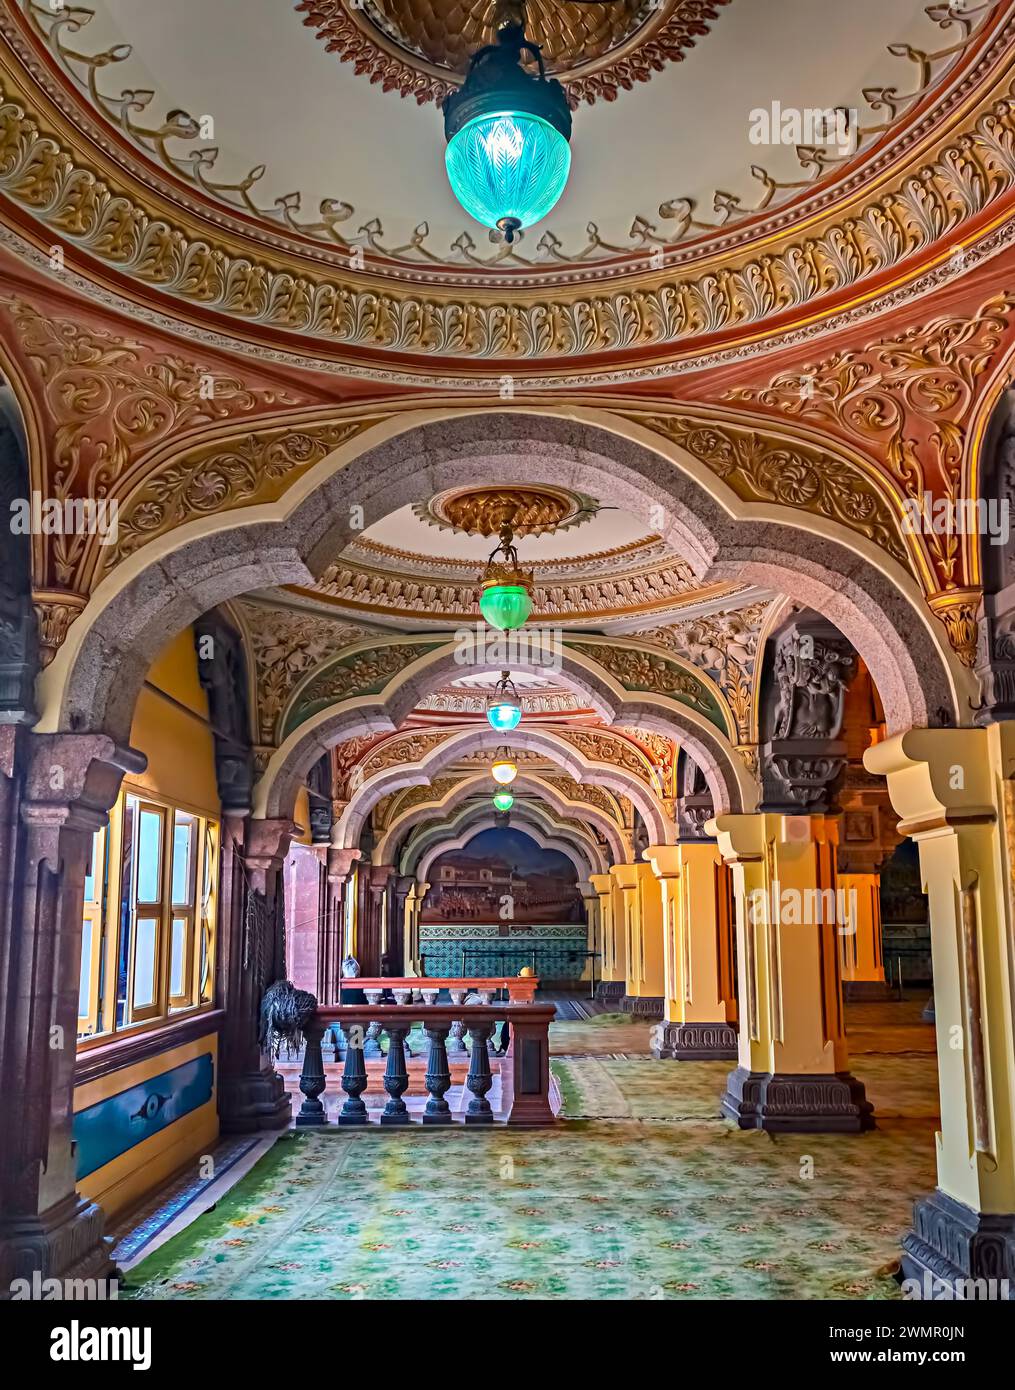 Beautiful, colorful interior of the Mysore Palace, also known as Amba Vilas Palace, in Karnataka, India , which is a historical palace and a royal res Stock Photo